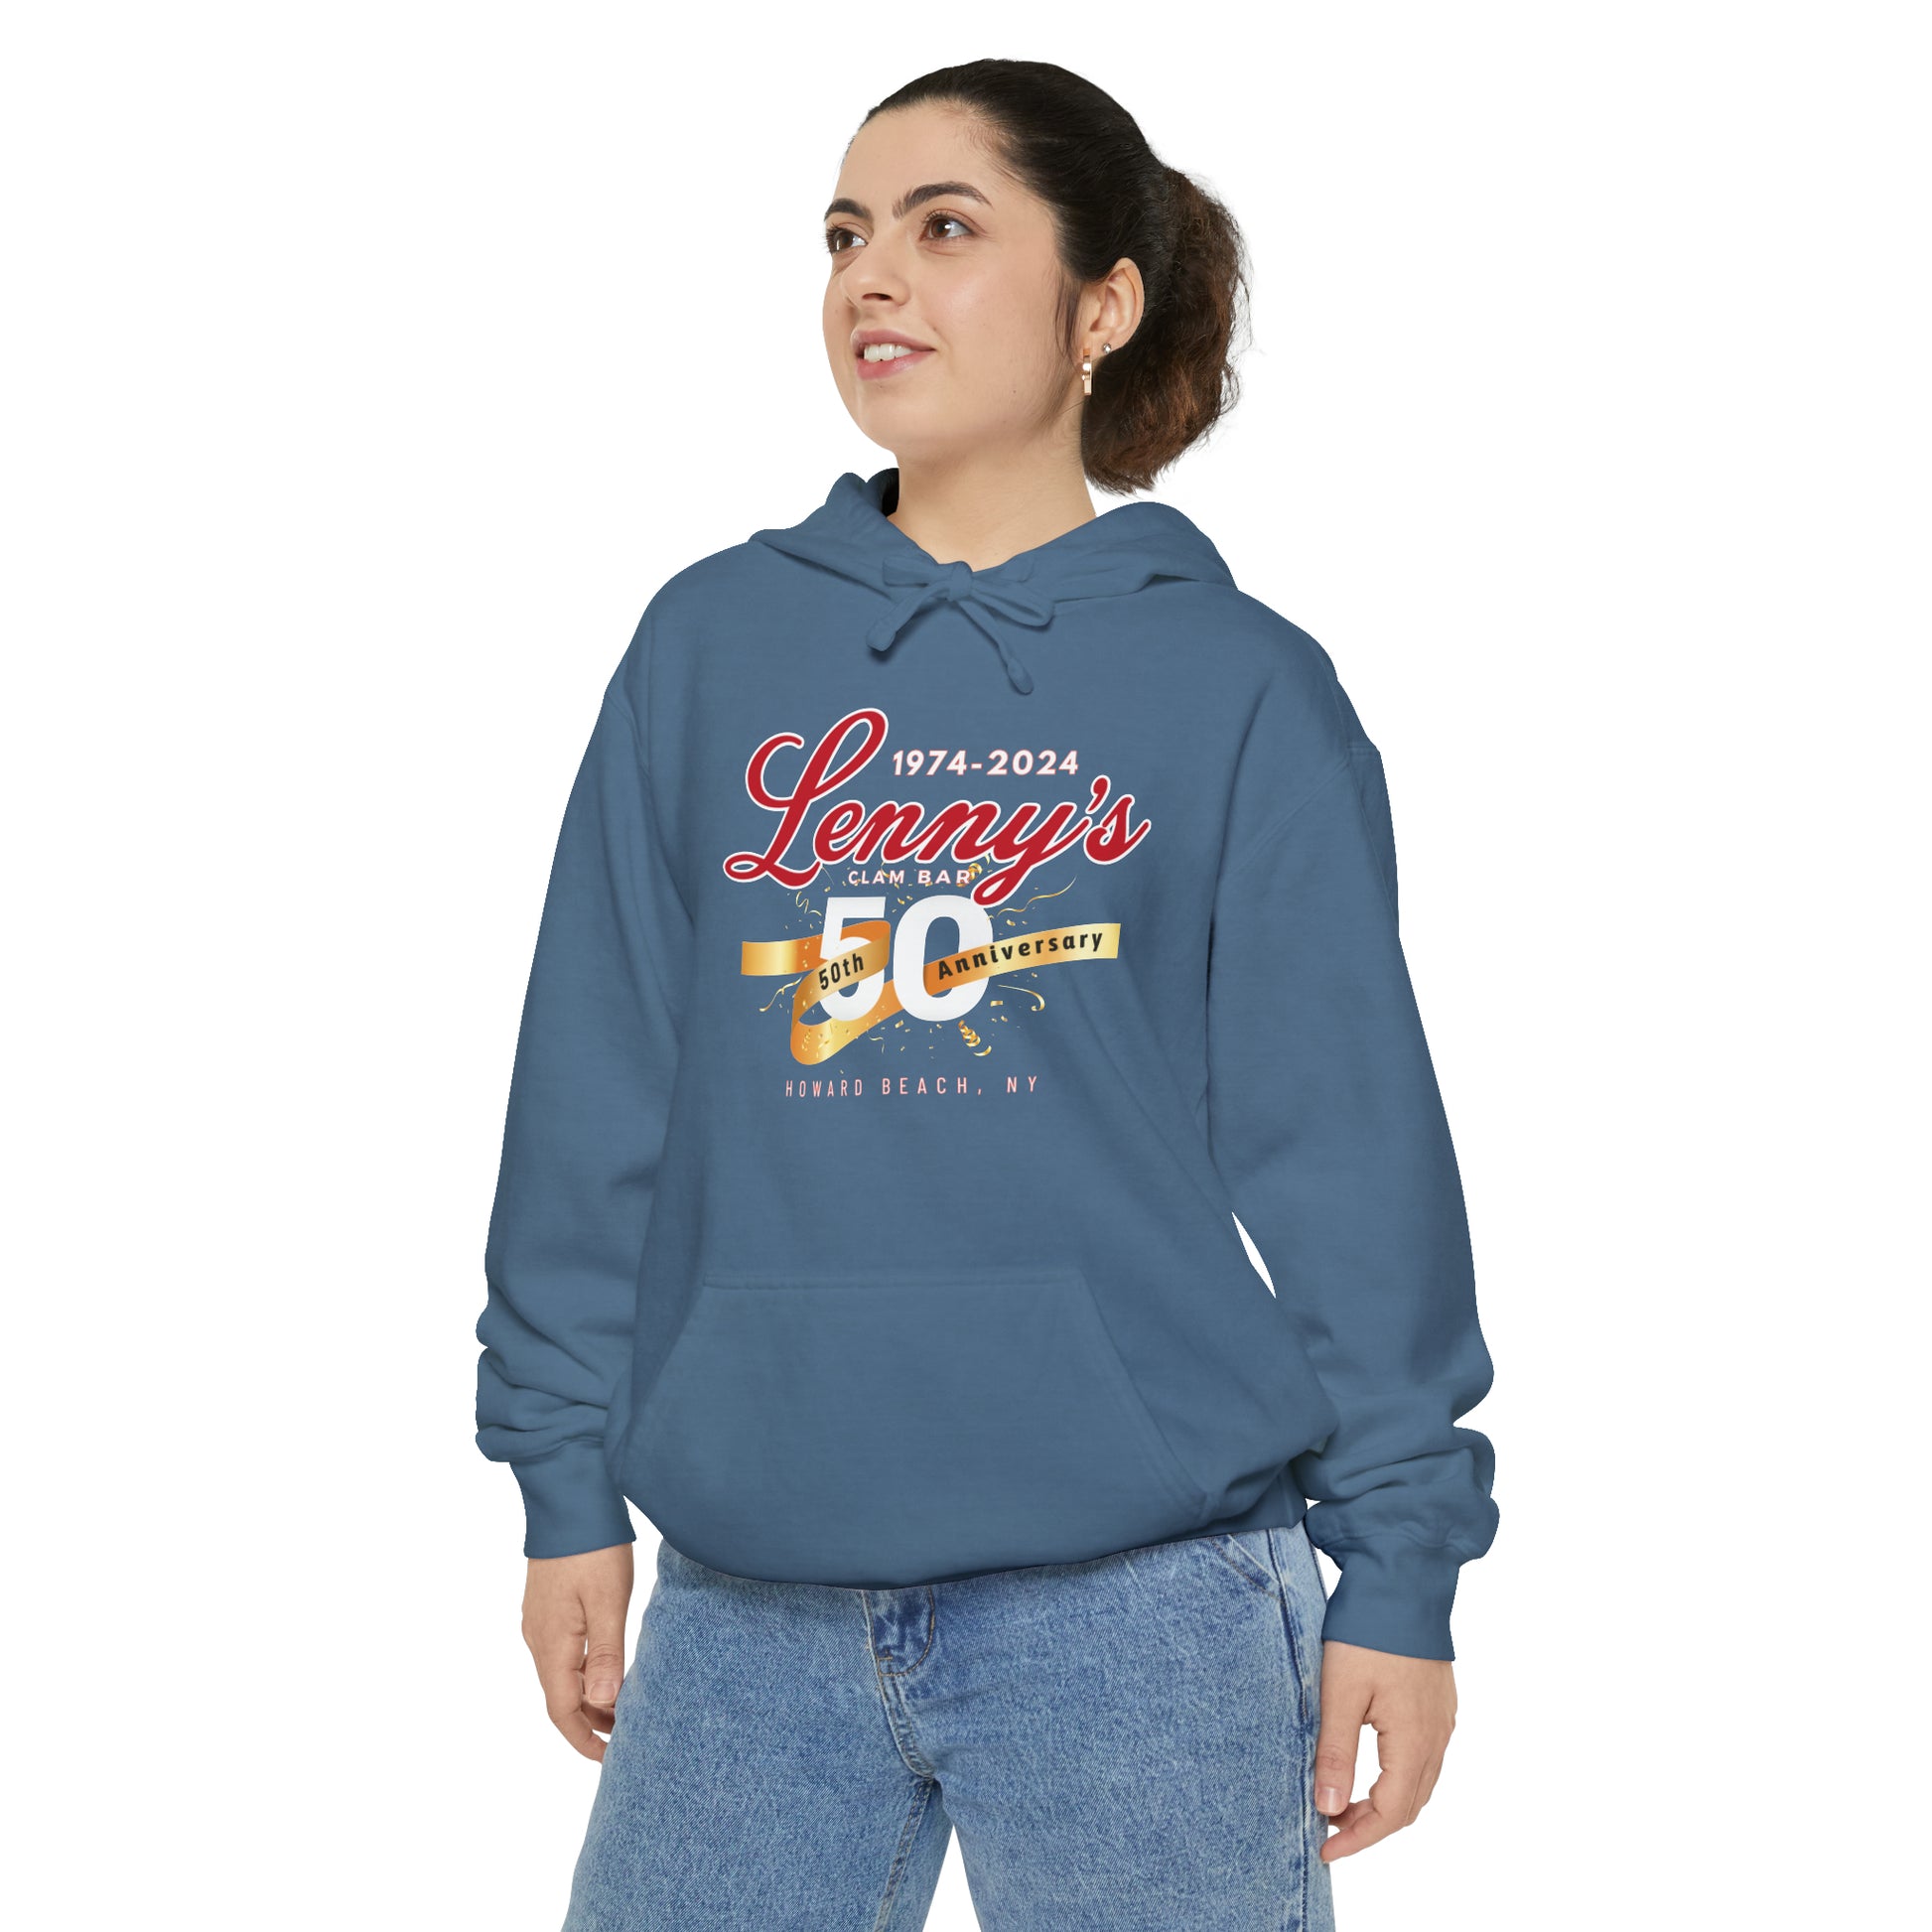 Lenny's 50th Anniversary Commemorative Heavyweight Garment-Dyed Hoodie –  Lenny's Clam Bar Merch Store